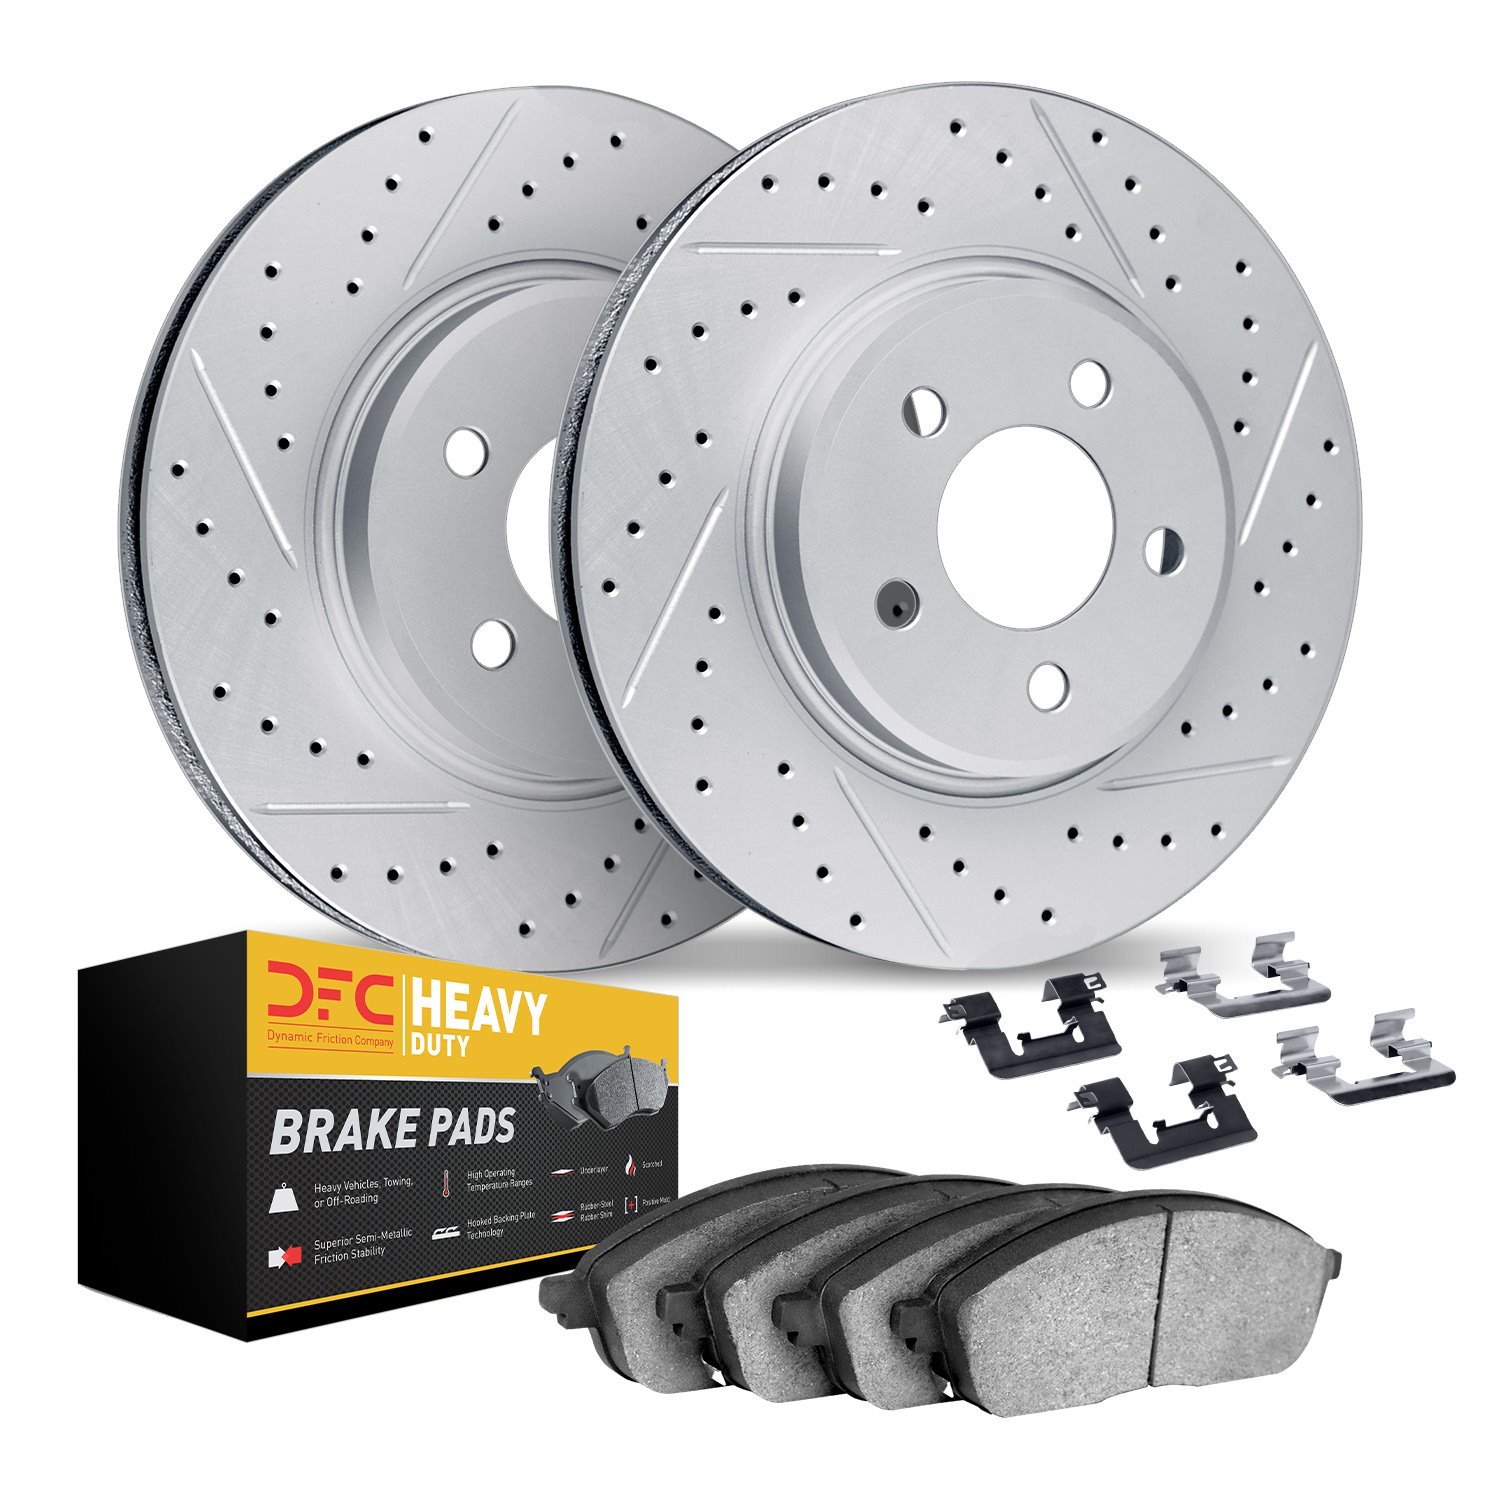 2212-99075 Geoperformance Drilled/Slotted Rotors w/Heavy-Duty Pads Kit & Hardware, 1986-1993 Ford/Lincoln/Mercury/Mazda, Positio